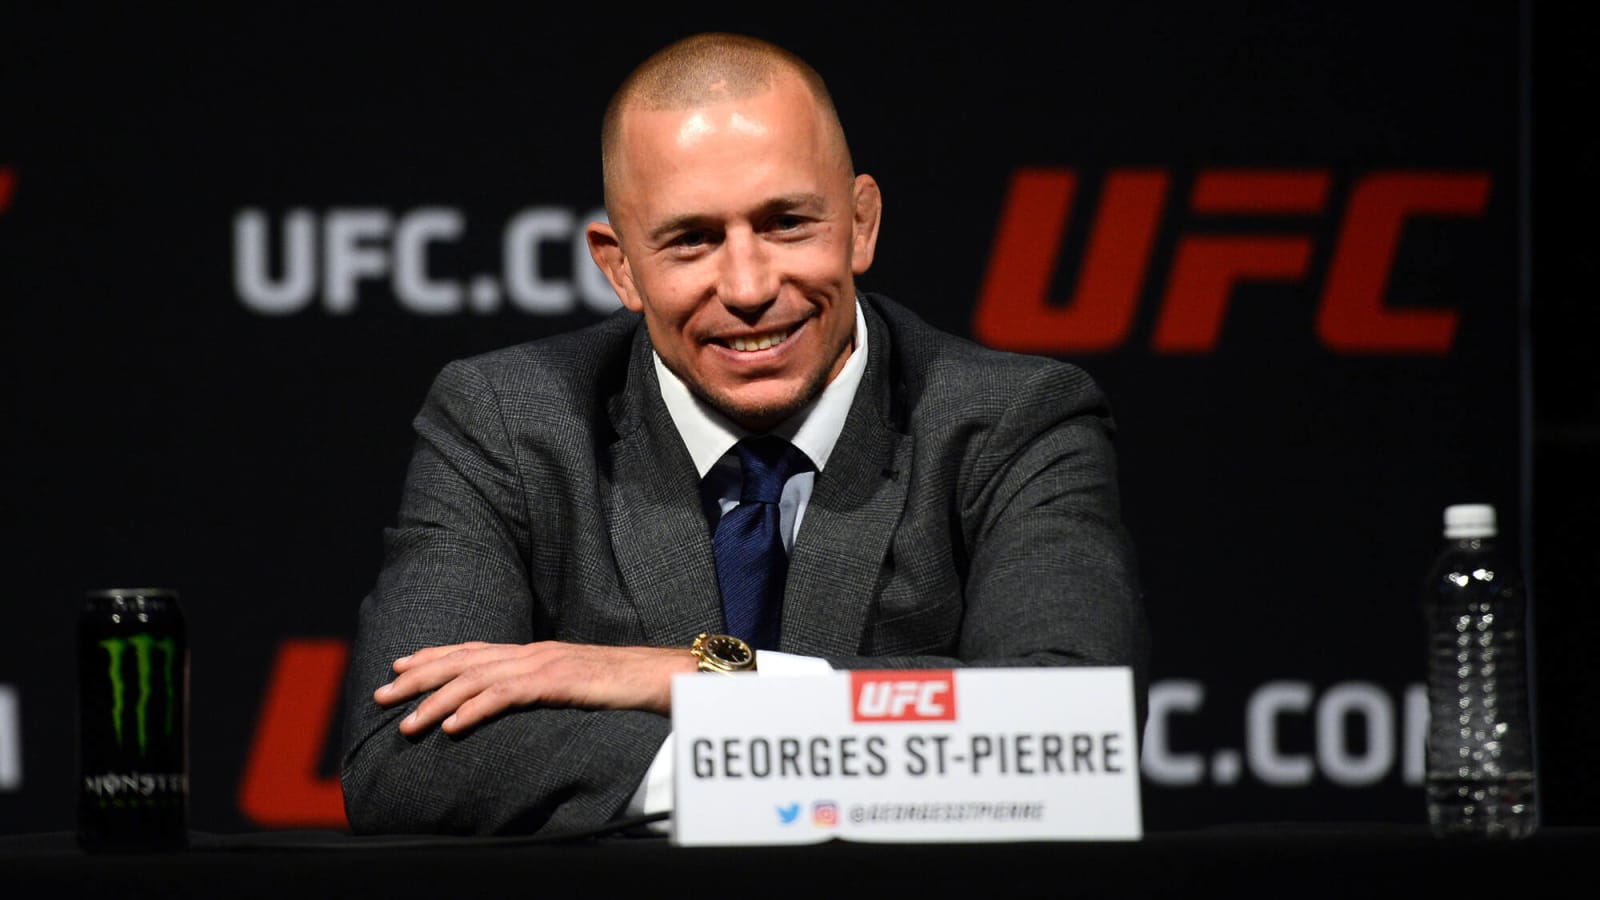 Georges St-Pierre Offers More Detail About Dana White Preventing Him Fighting De La Hoya After MMA Retirement: &#39;When I Asked Him For Permission...&#39;